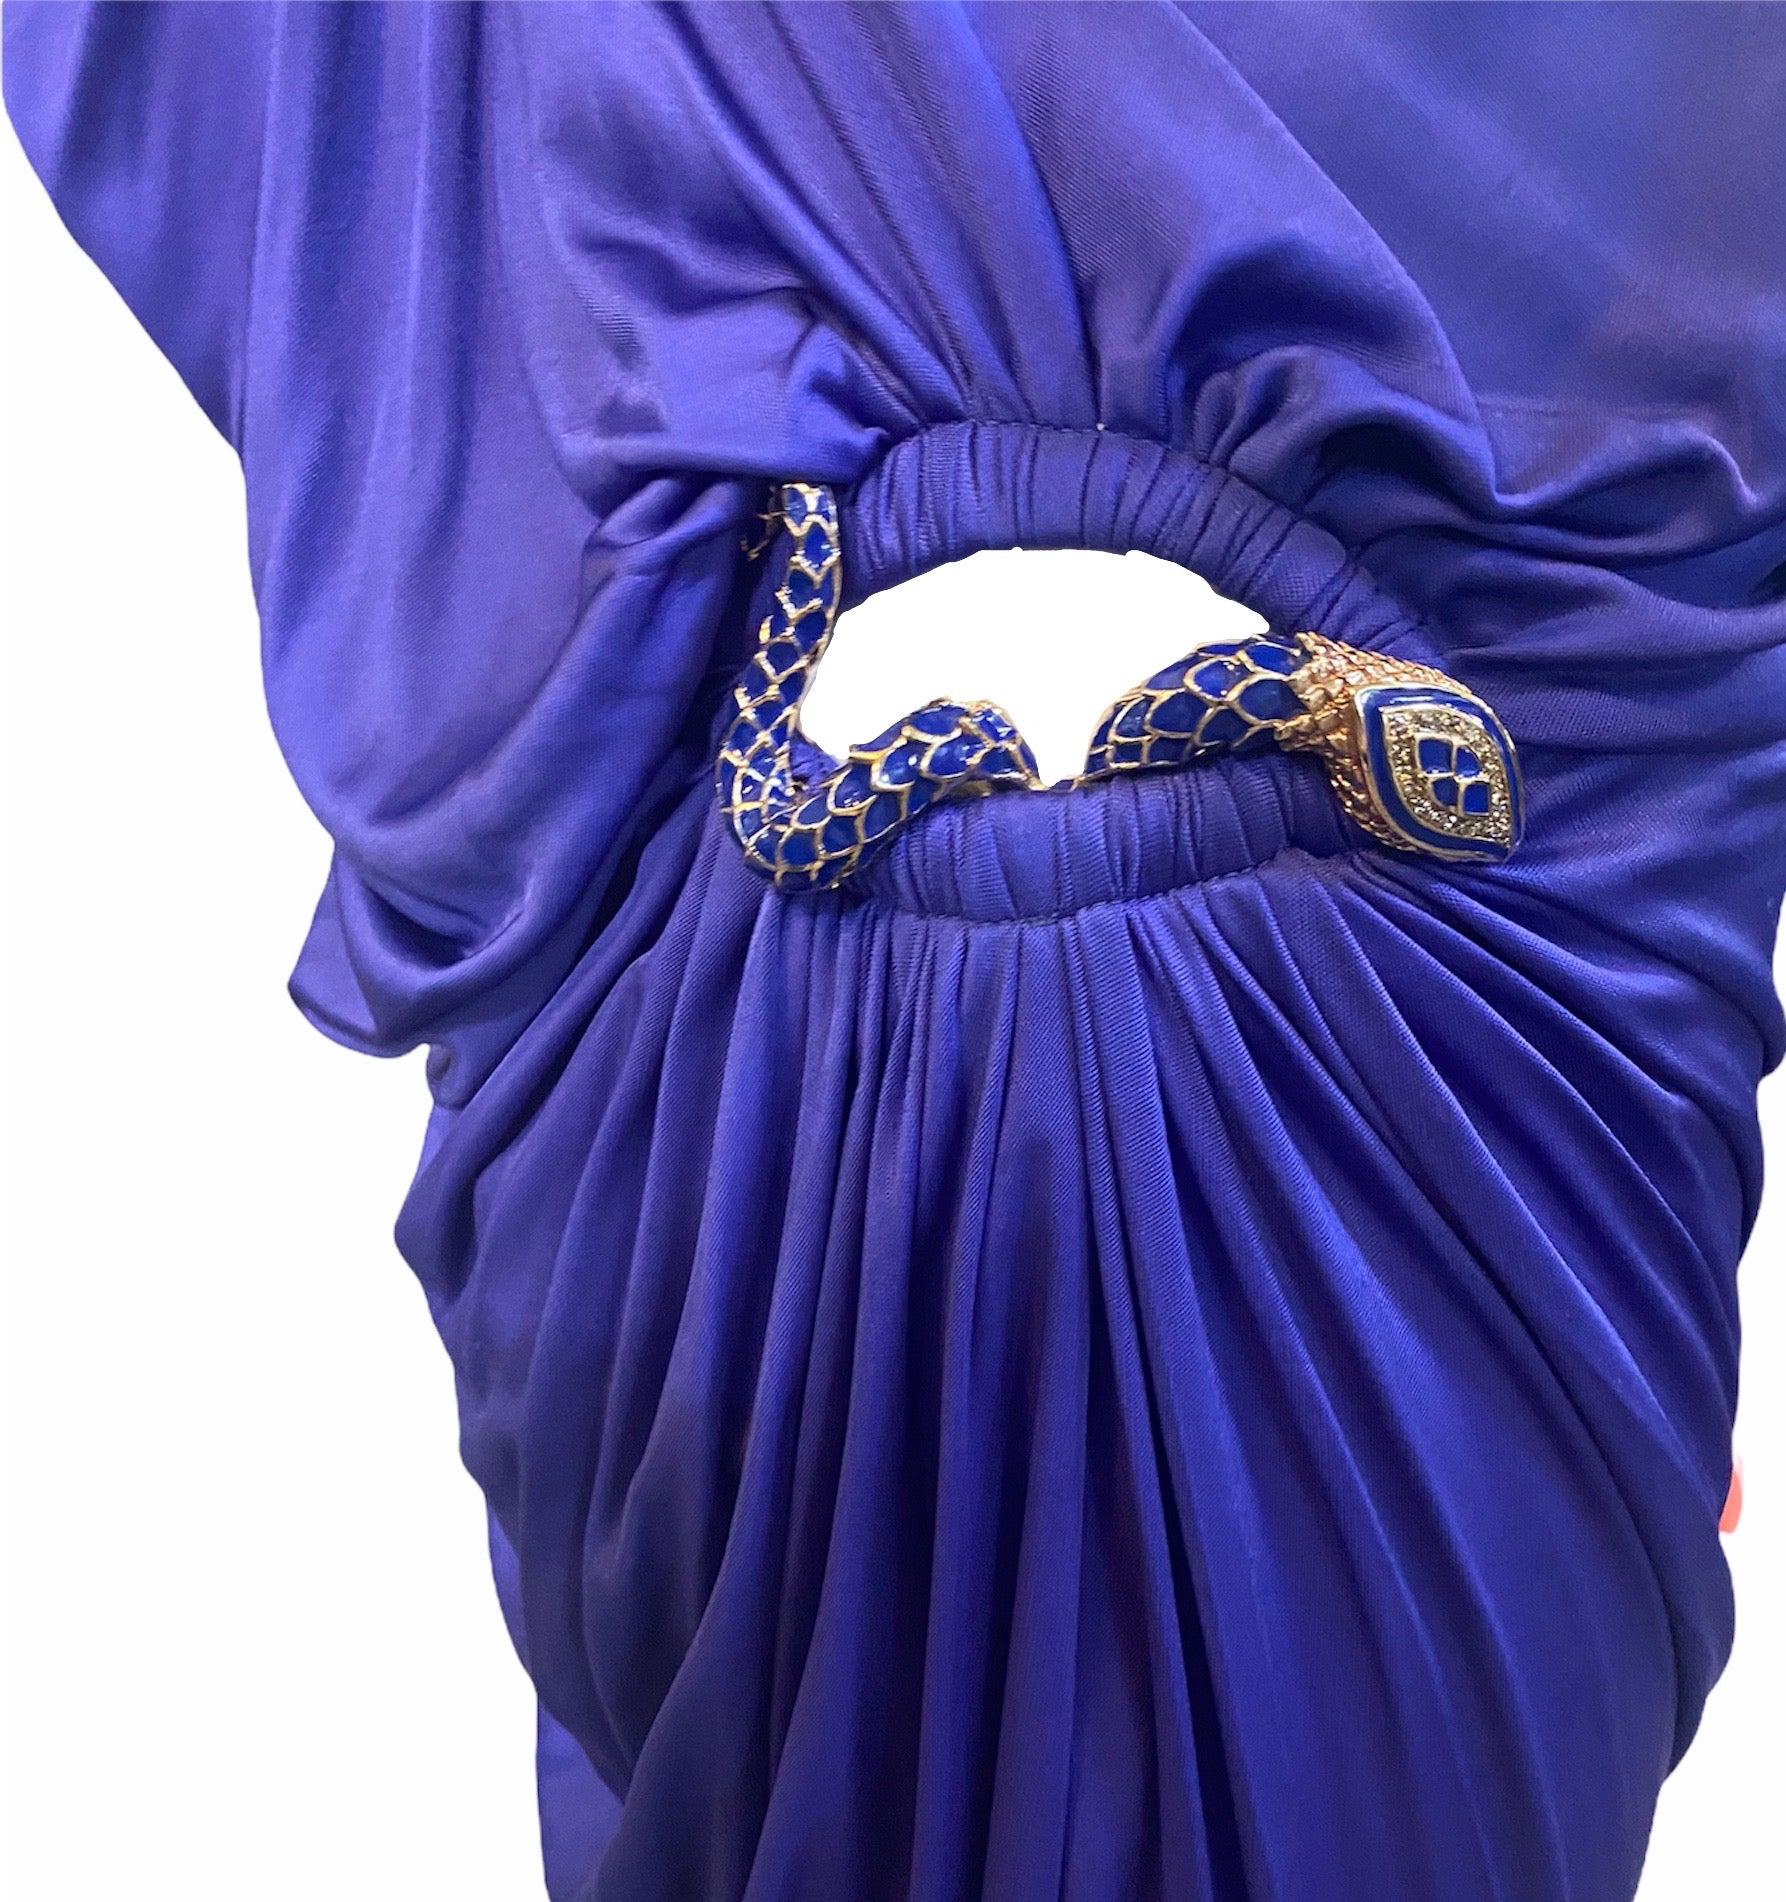  Roberto Cavalli Contemporary Purple Jersey One Shoulder Goddess Gown DETAIL 4 of 5